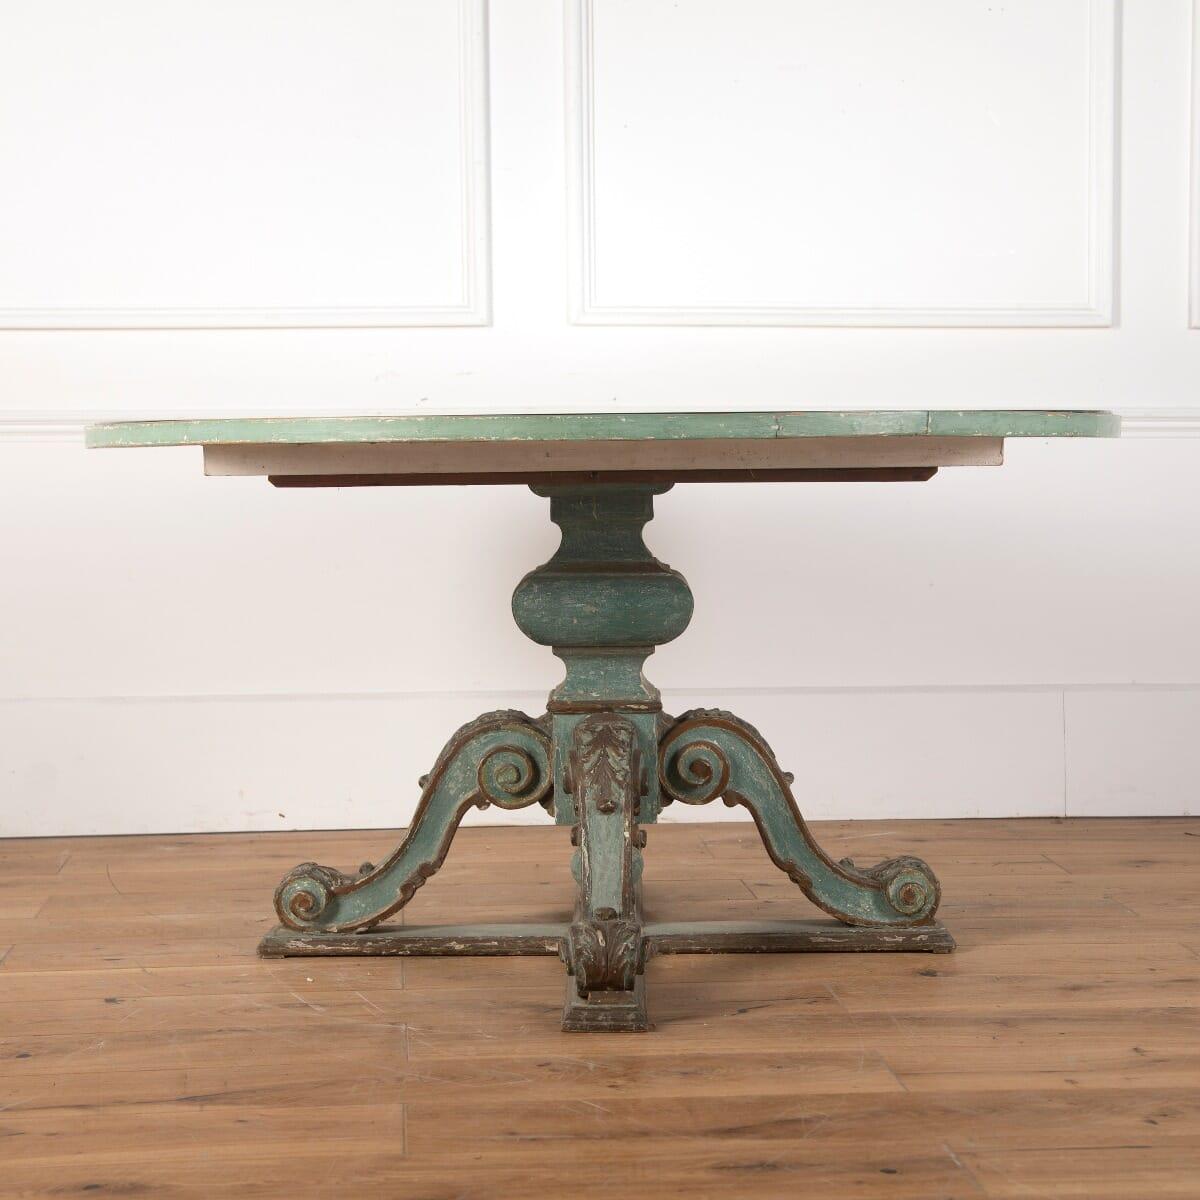 Italian 19th century painted centre table, with its original silvered mirrored top. 

This decorative table rests on a pronounced triform base, with elegant cabriole legs featuring volute and acanthus carving. 

The base has lovely blue-green